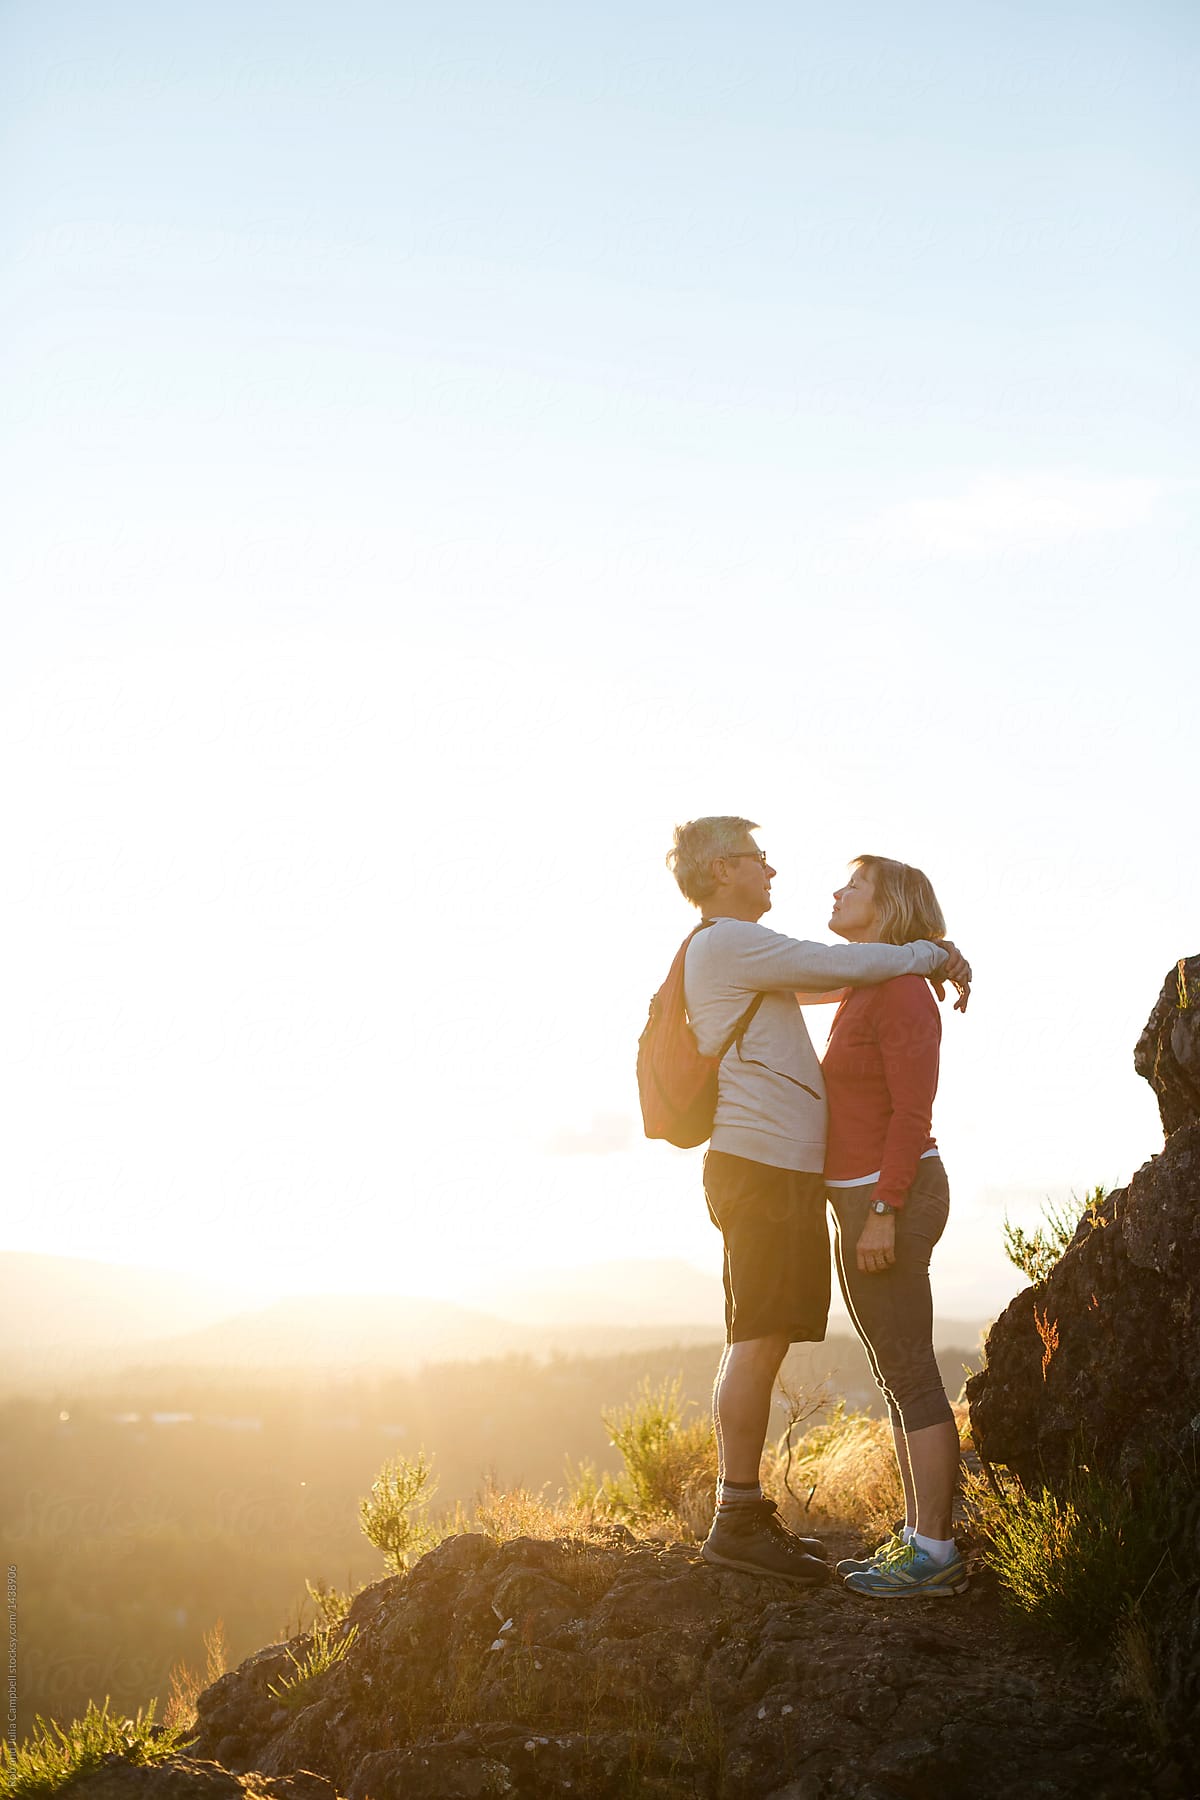 Fit, active middle age couple hiking together at sunset